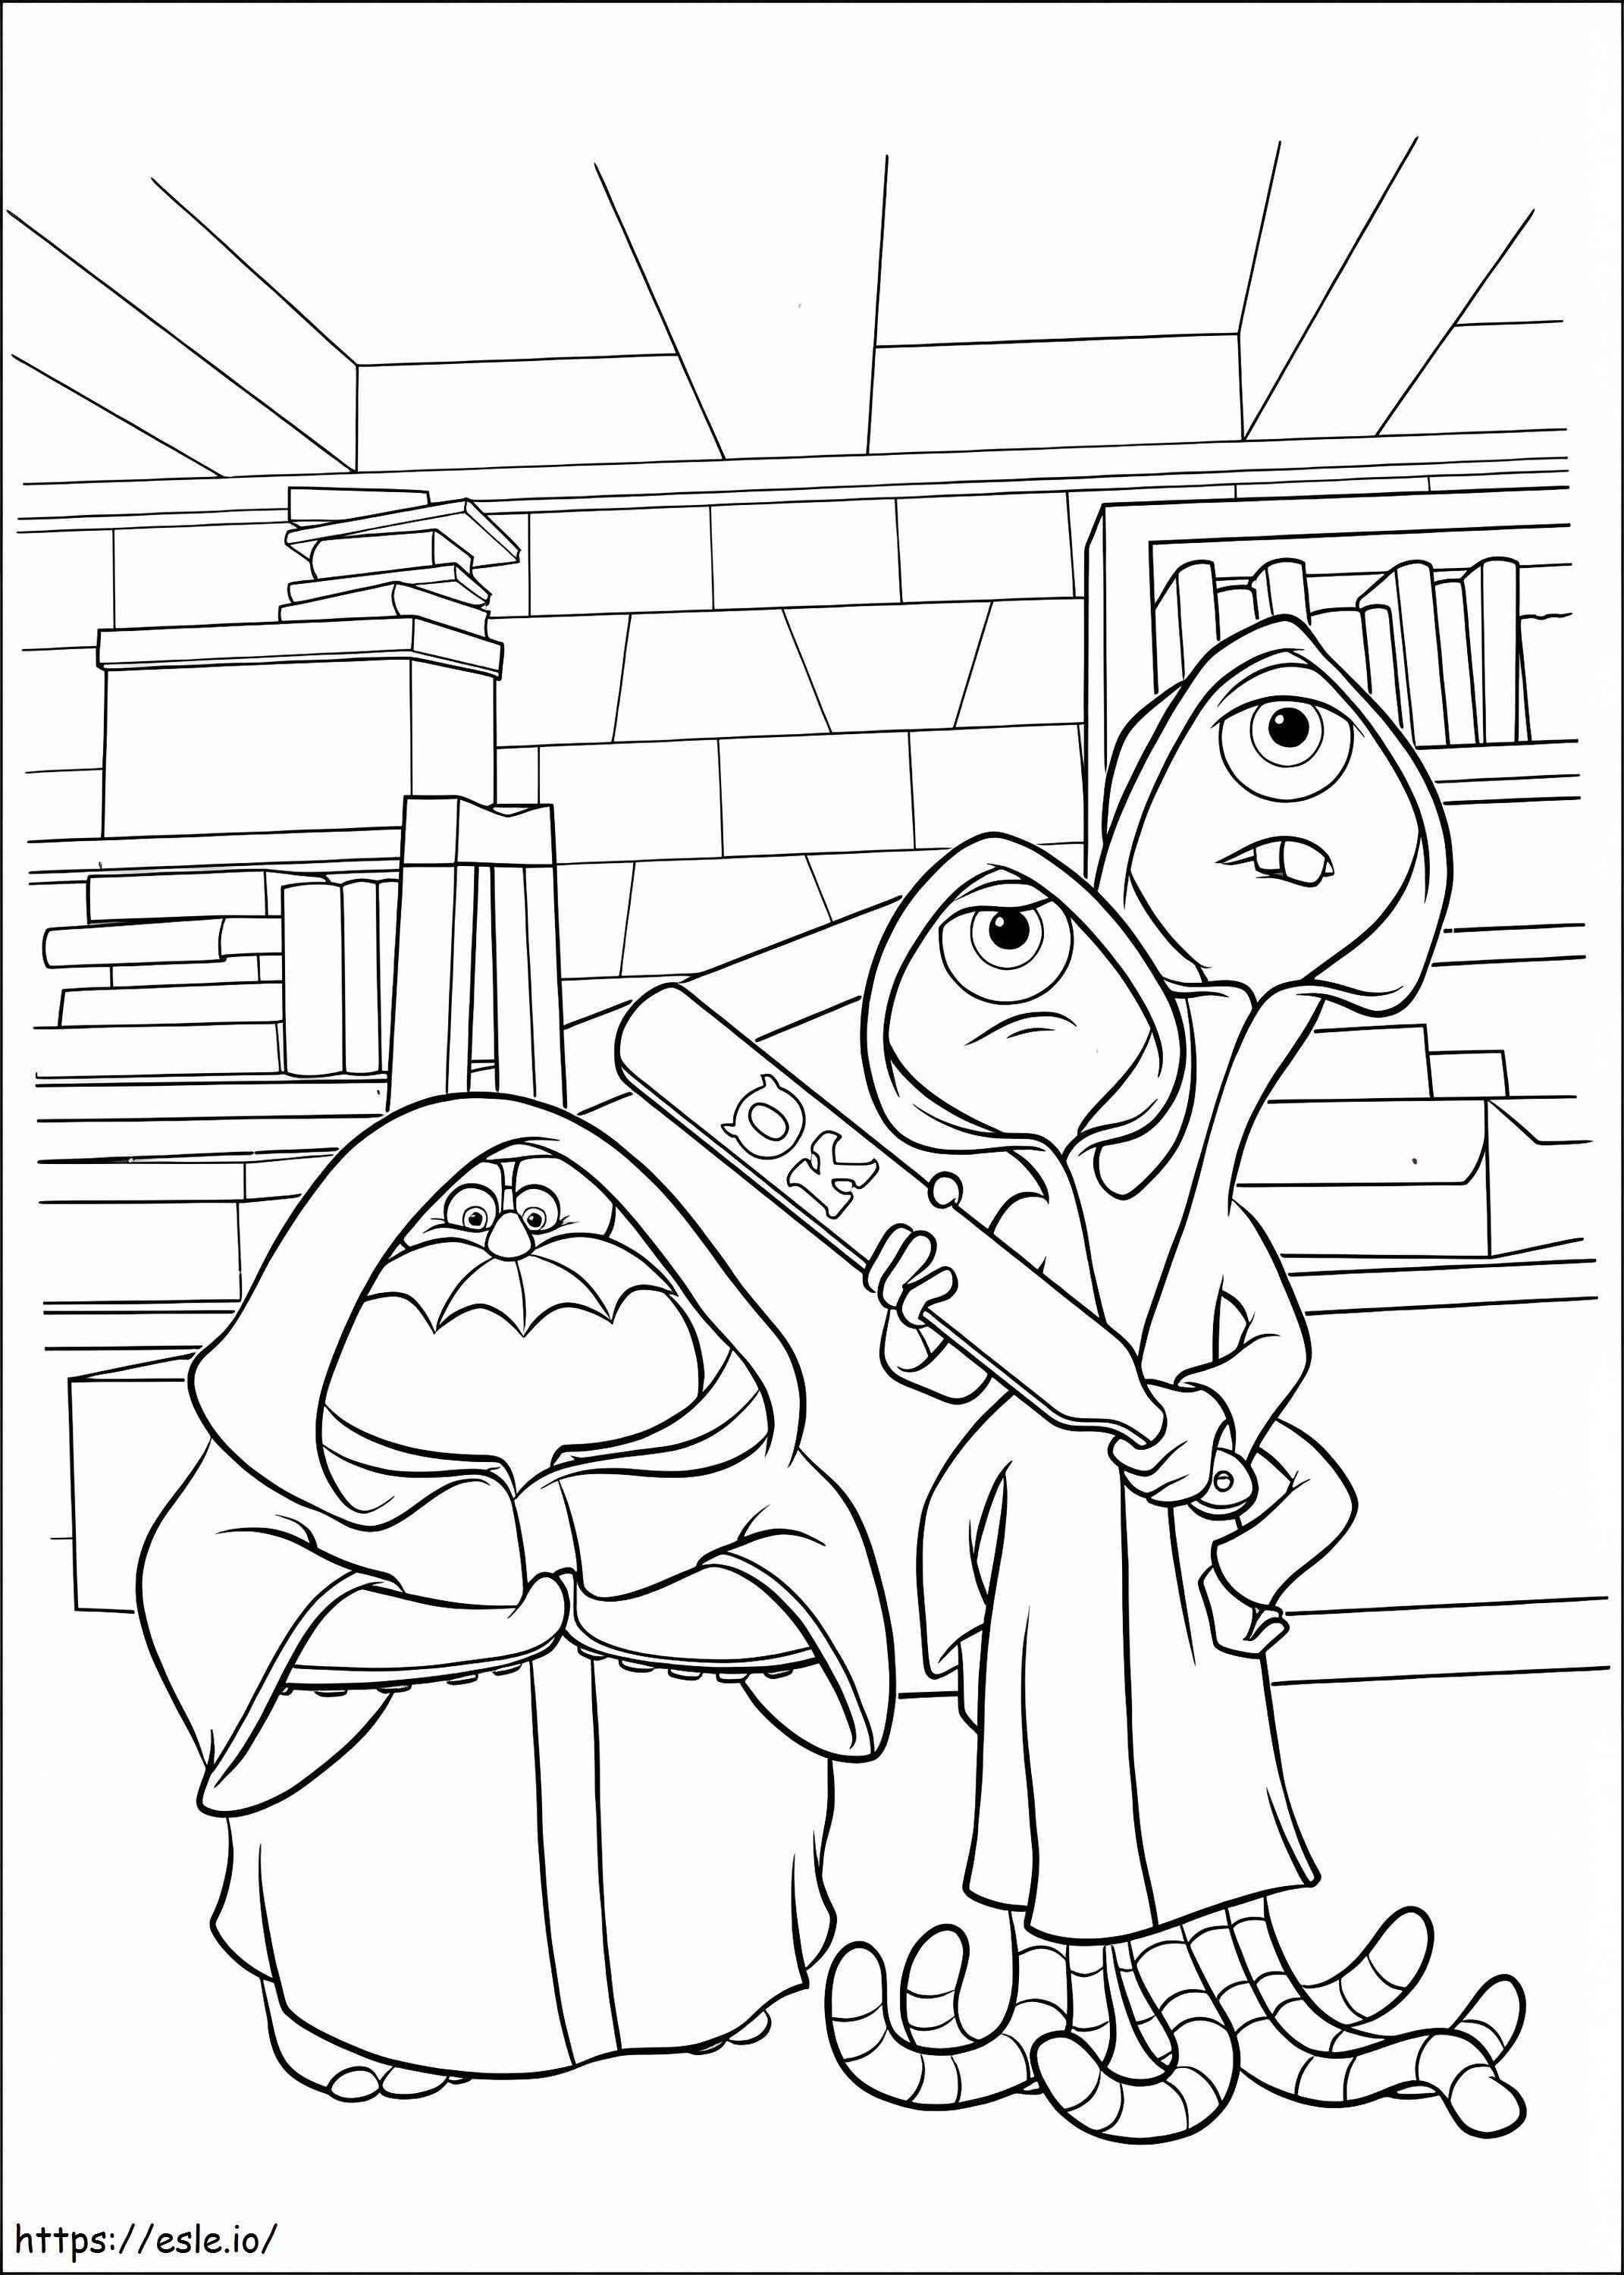 Monsters University 6 coloring page